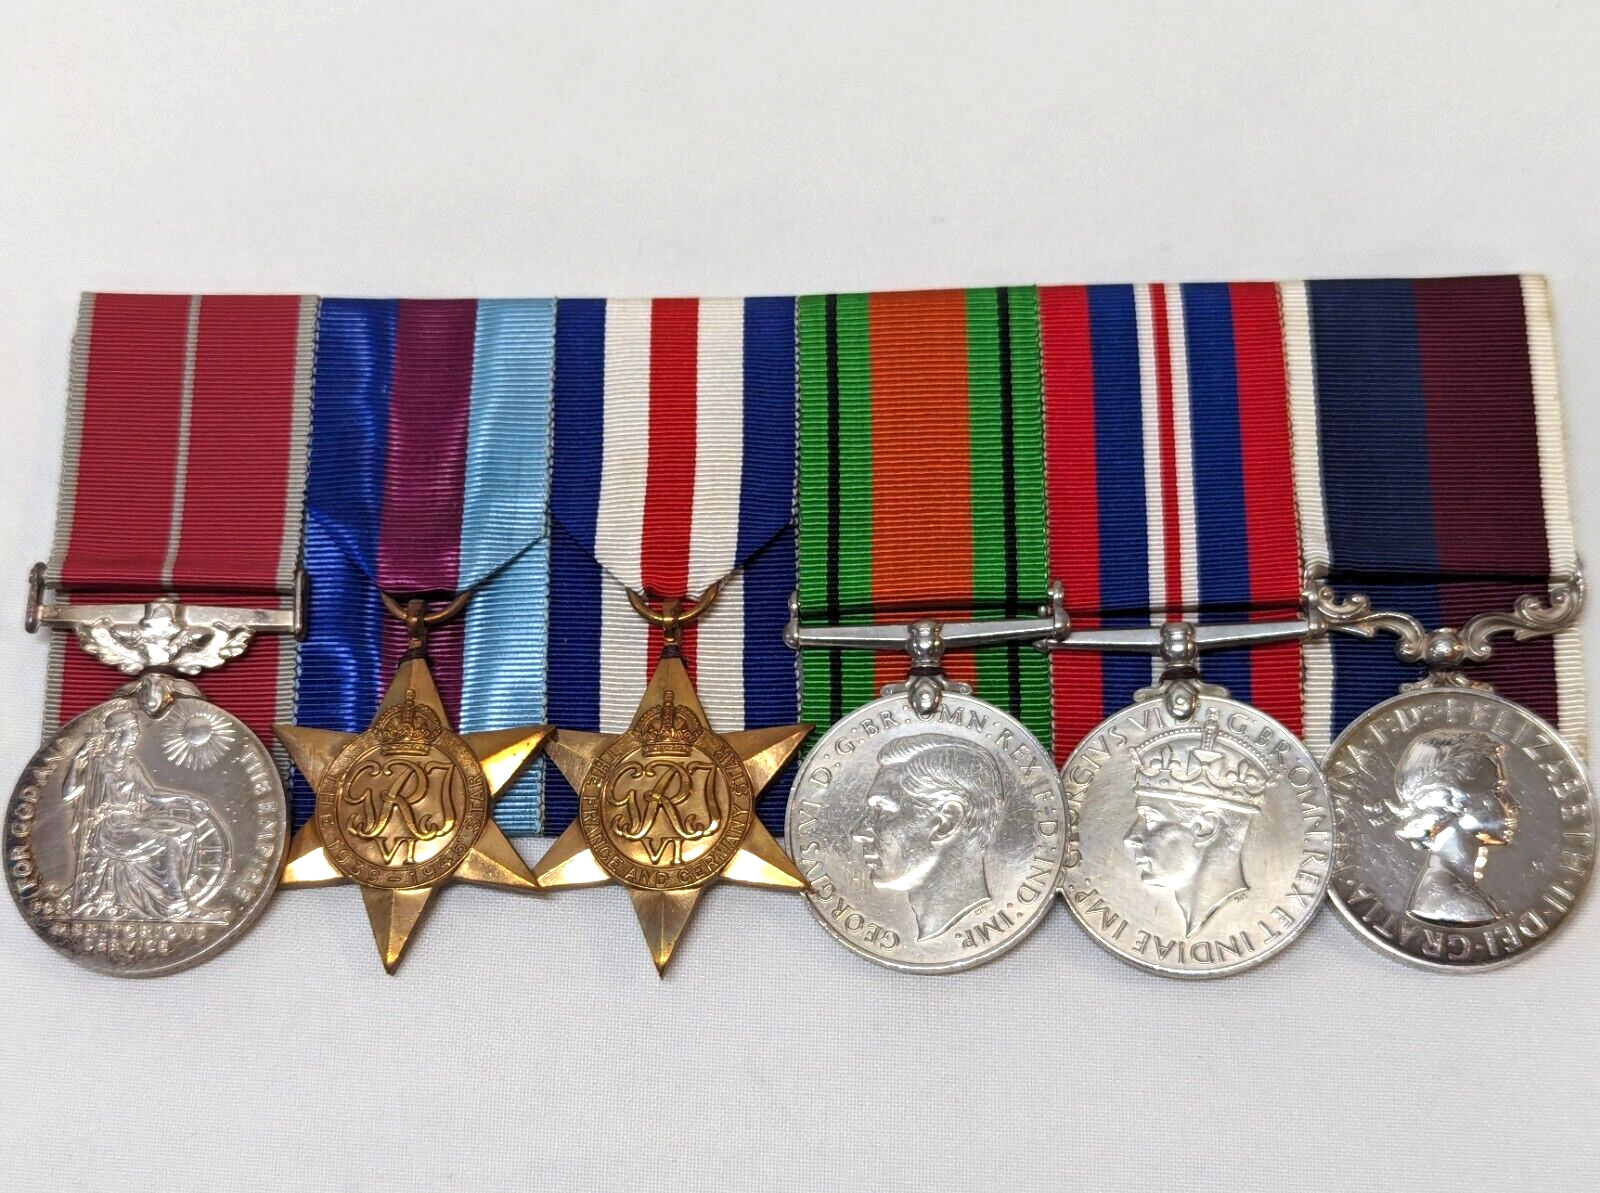 WW2 British Empire Medal Royal Air Force medals E.S. Reeves WW2 – 1950+